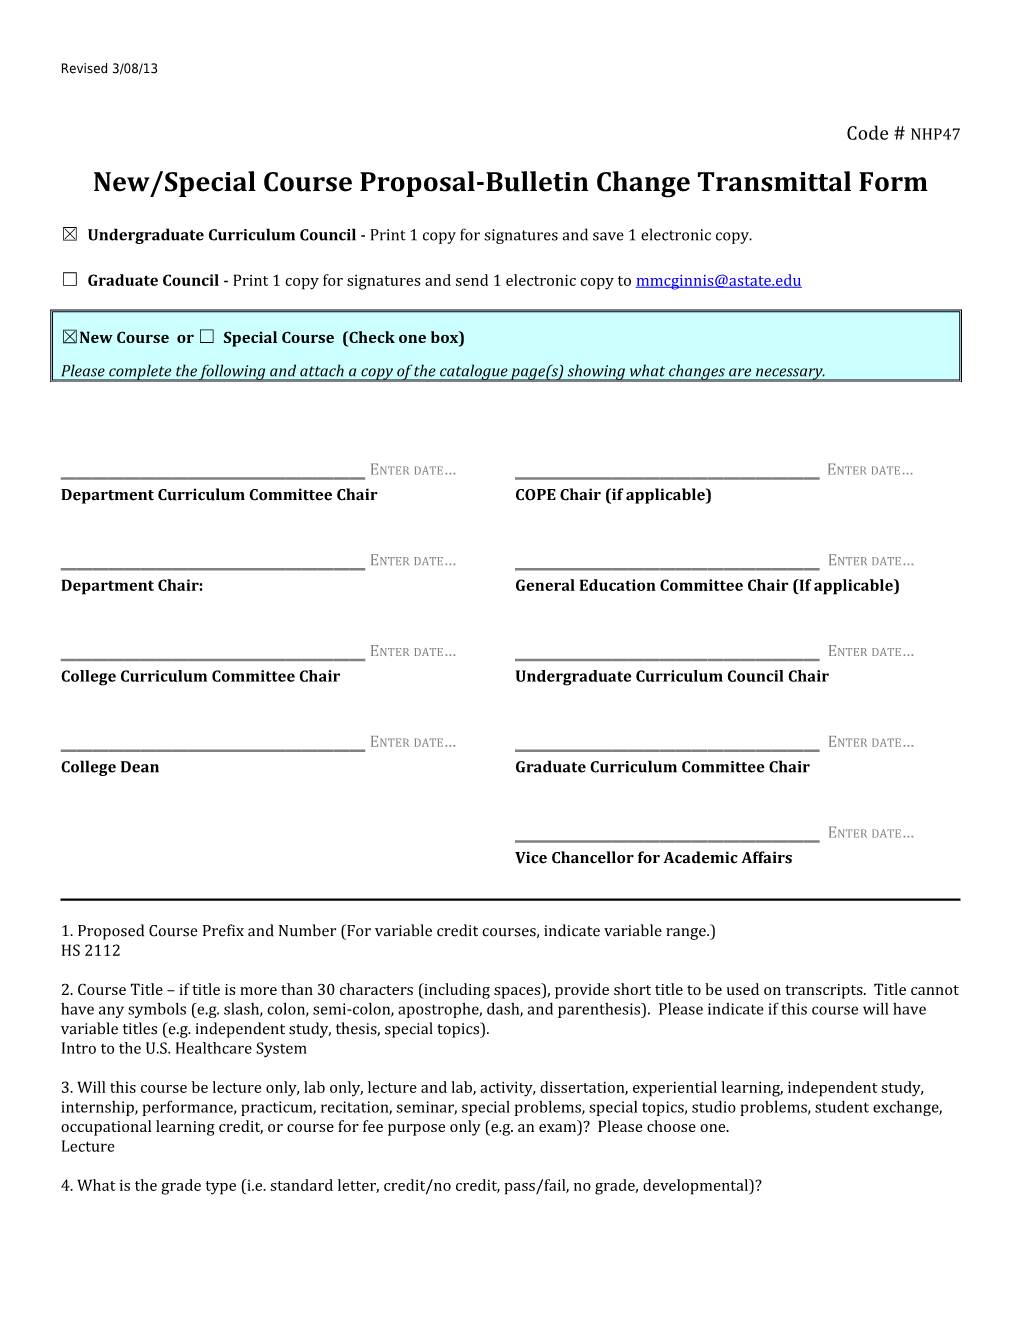 New/Special Course Proposal-Bulletin Change Transmittal Form s1